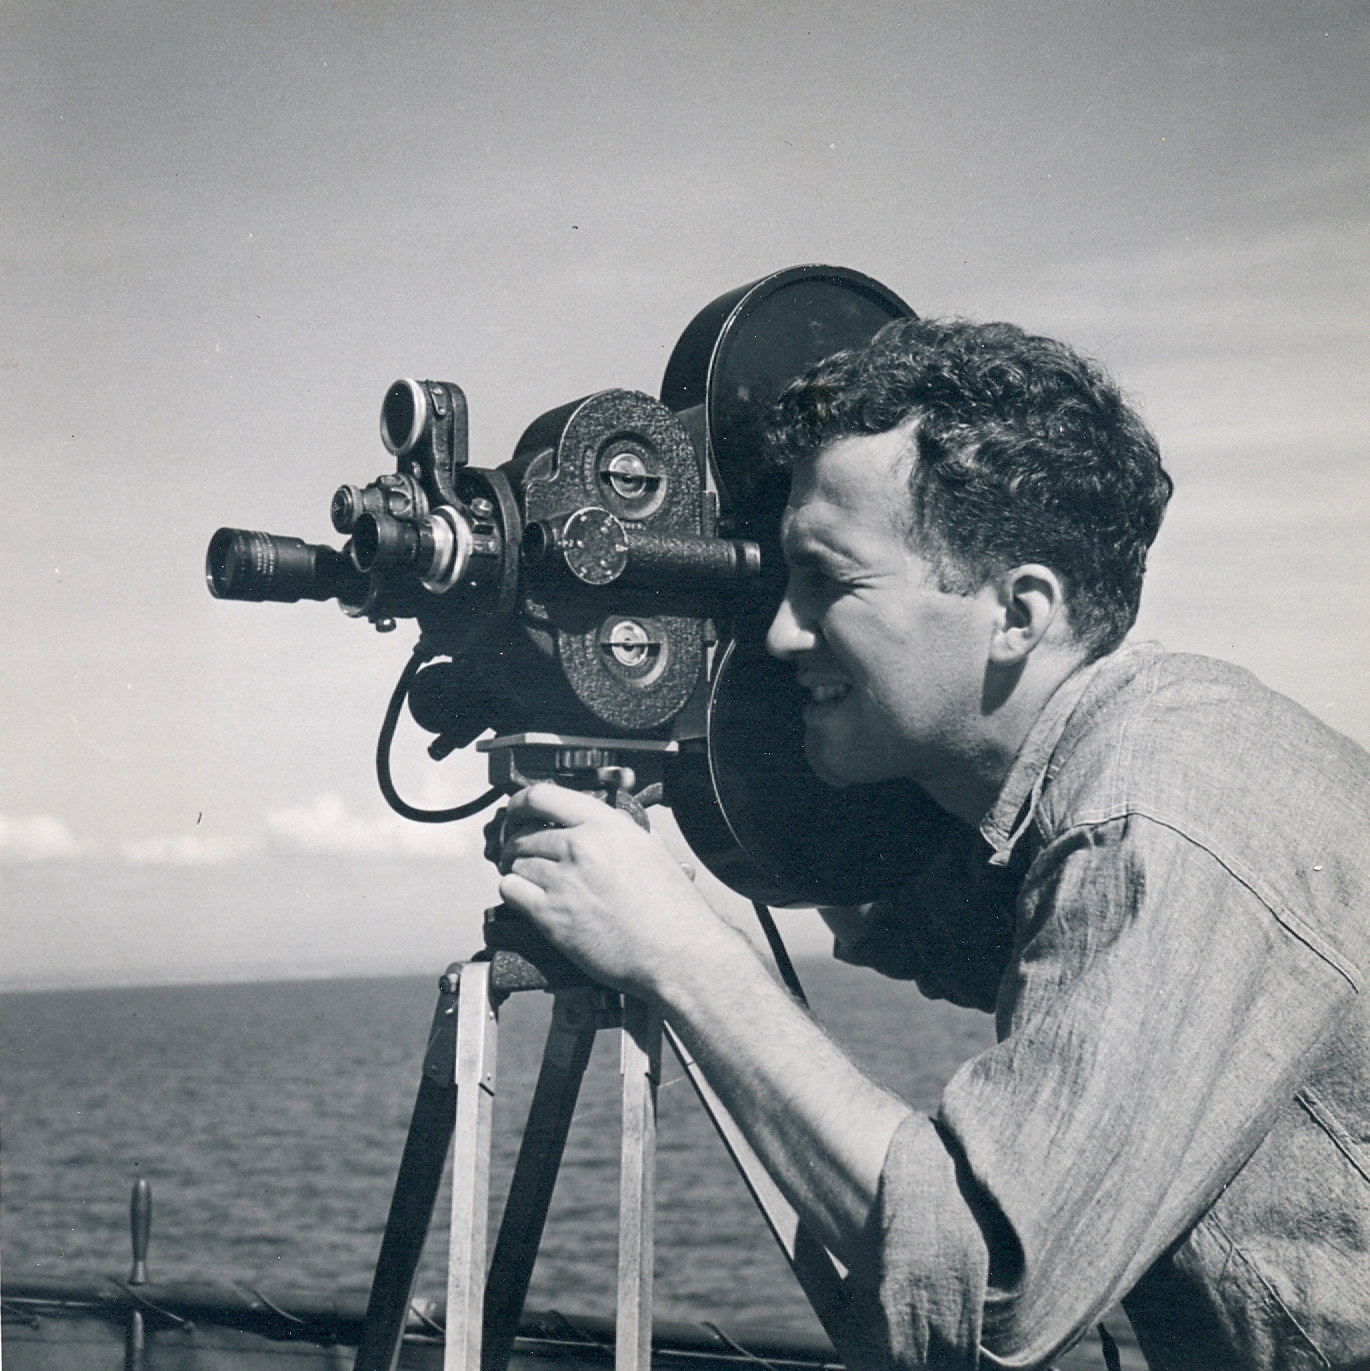 United States Navy photographer operating a movie camera on the flight deck of the USS Saratoga in the South Pacific, circa 1942.